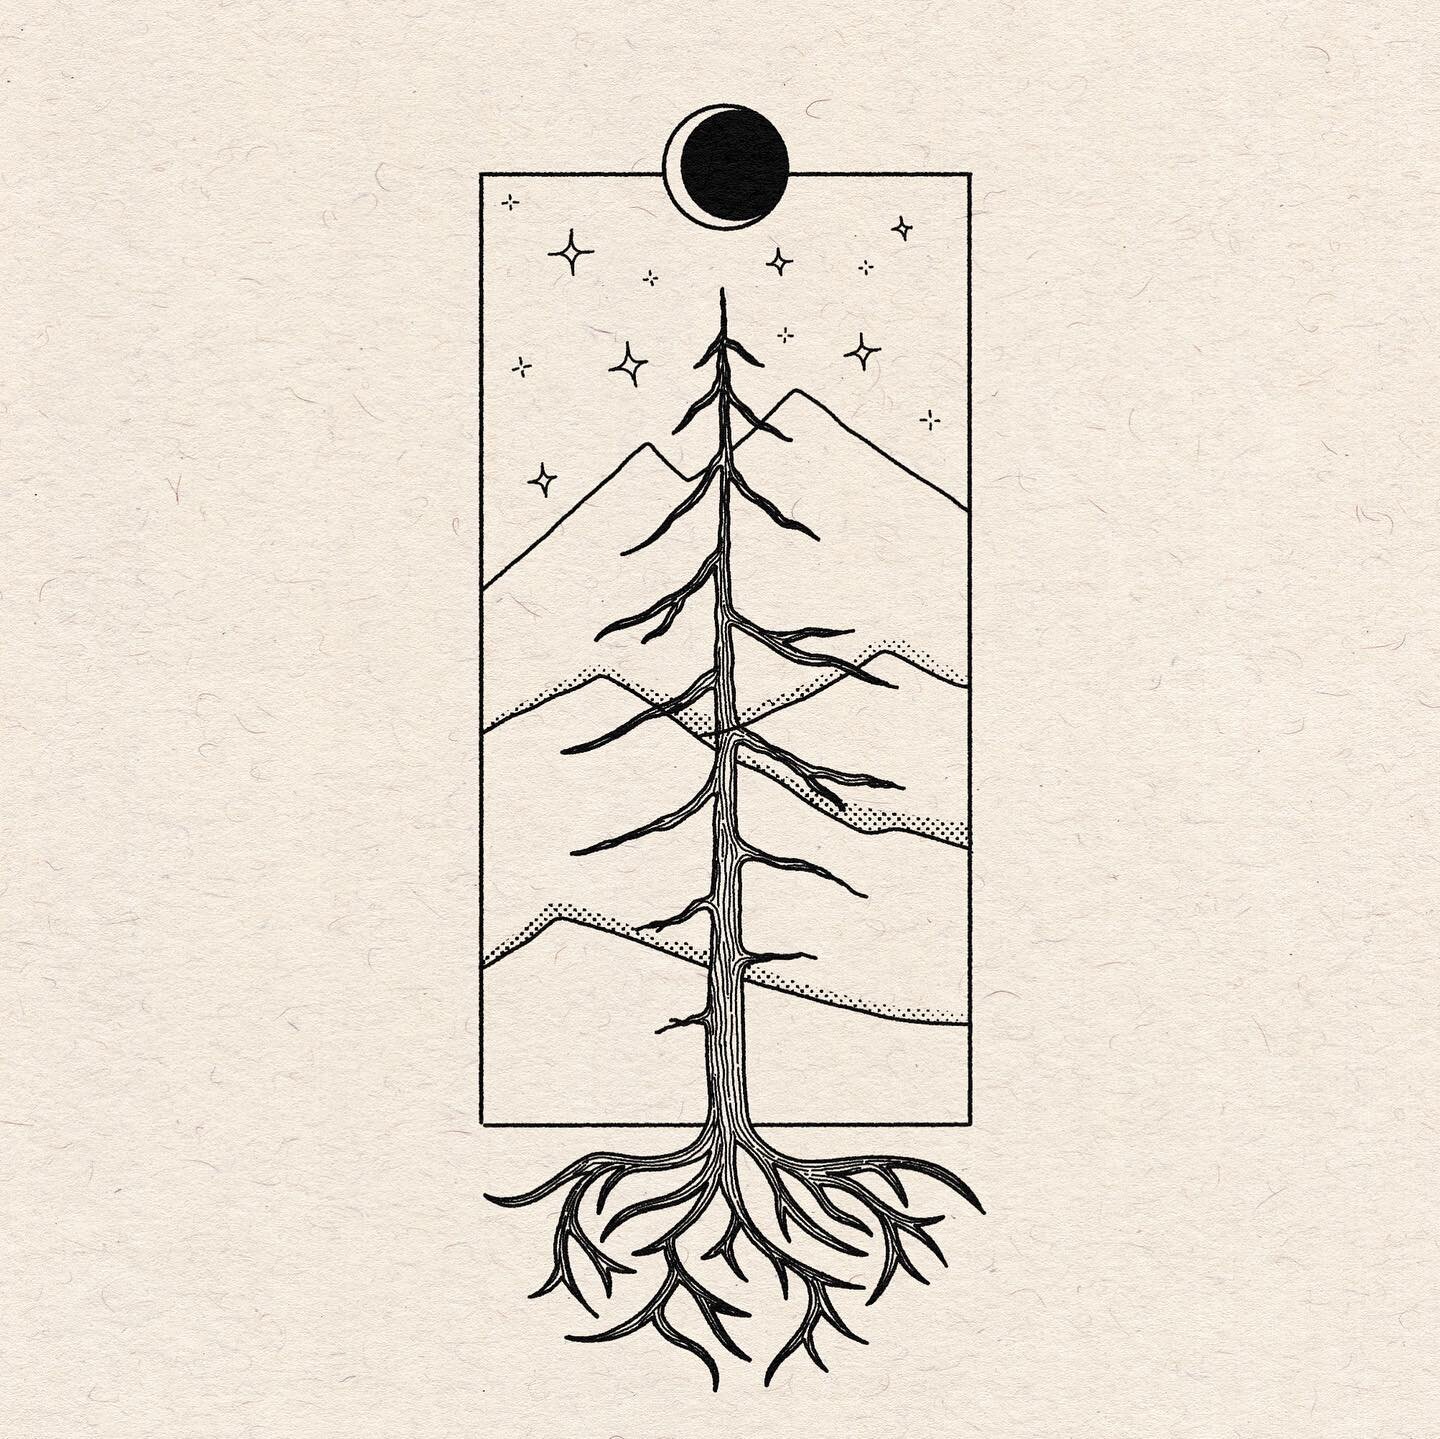 Finding ways to stay rooted 🌙✨
⠀
⠀
⠀
⠀
⠀
⠀
#stayrooted #pinetrees #digitalart #digitalillustration #moonphases #art #procreate #trees #treeroots #staygrounded #natureart #natureinspired #stipplingart #penandink #lineworkart #illustration #illustrati